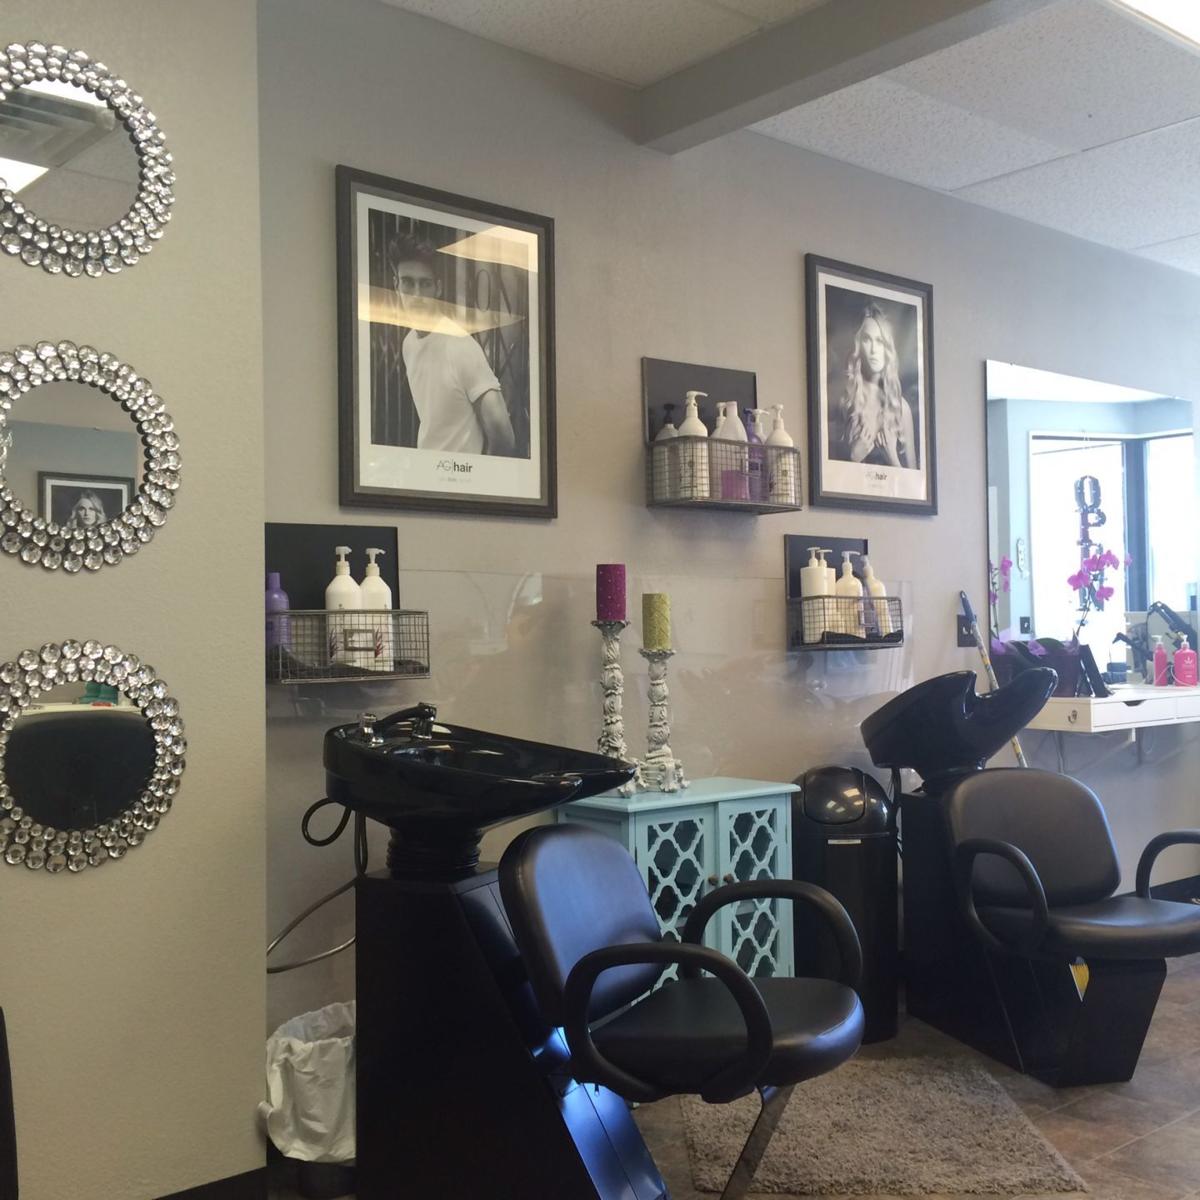 Best Of The Best 18 Best Salon The Hair Loft In Belle Plaine Best Of The Best Swnewsmedia Com